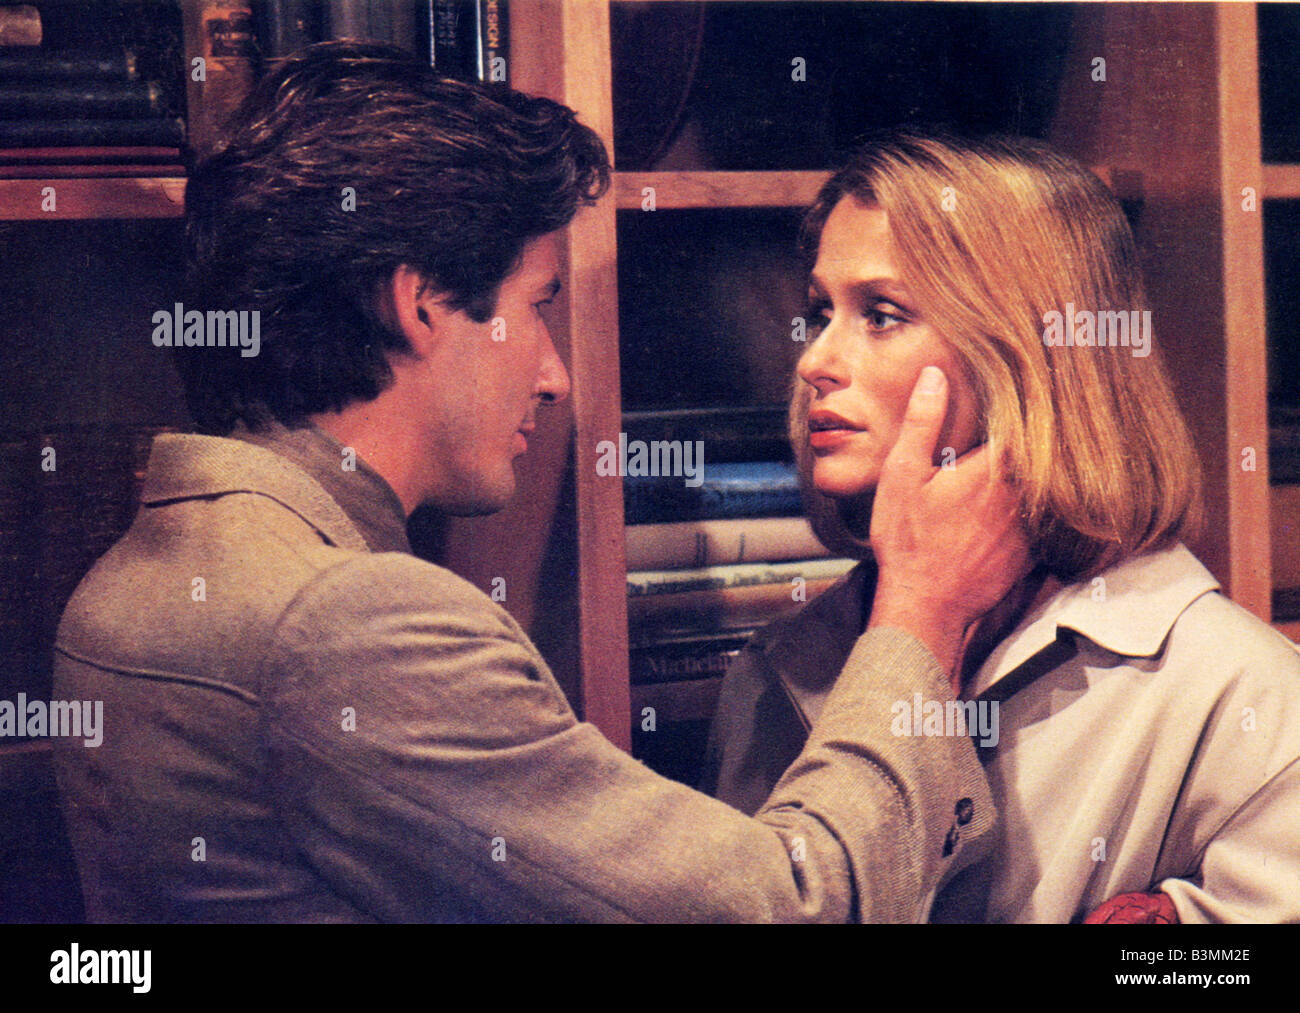 AMERICAN GIGOLO   1980 Paramount film with Richard Geere and Lauren Hutton Stock Photo